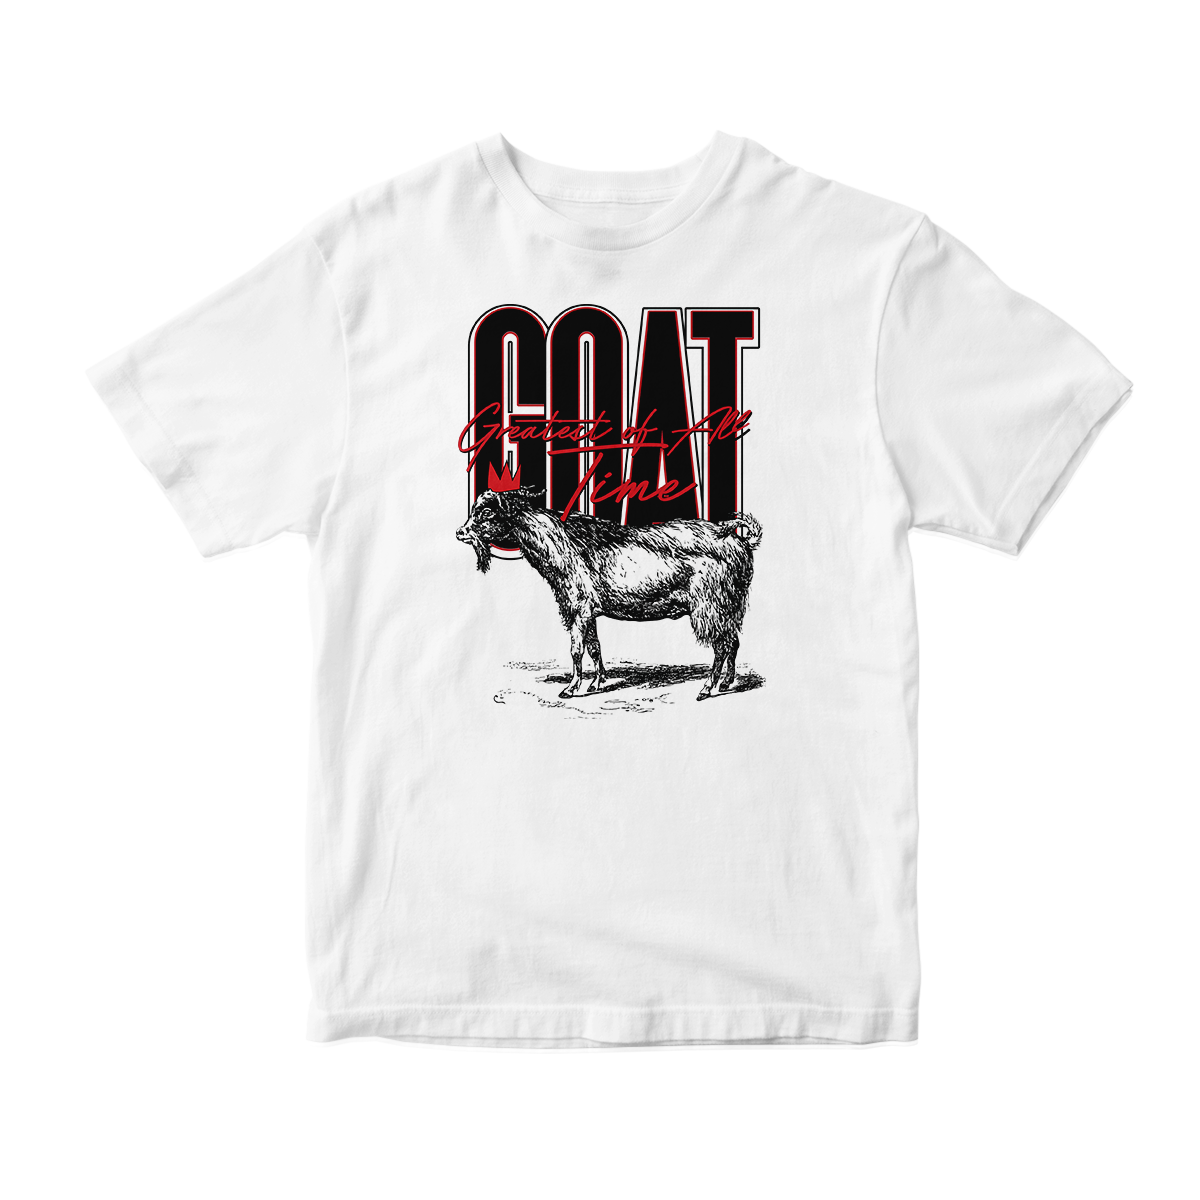 'Crown Goat' in Bred 11 CW Short Sleeve Tee